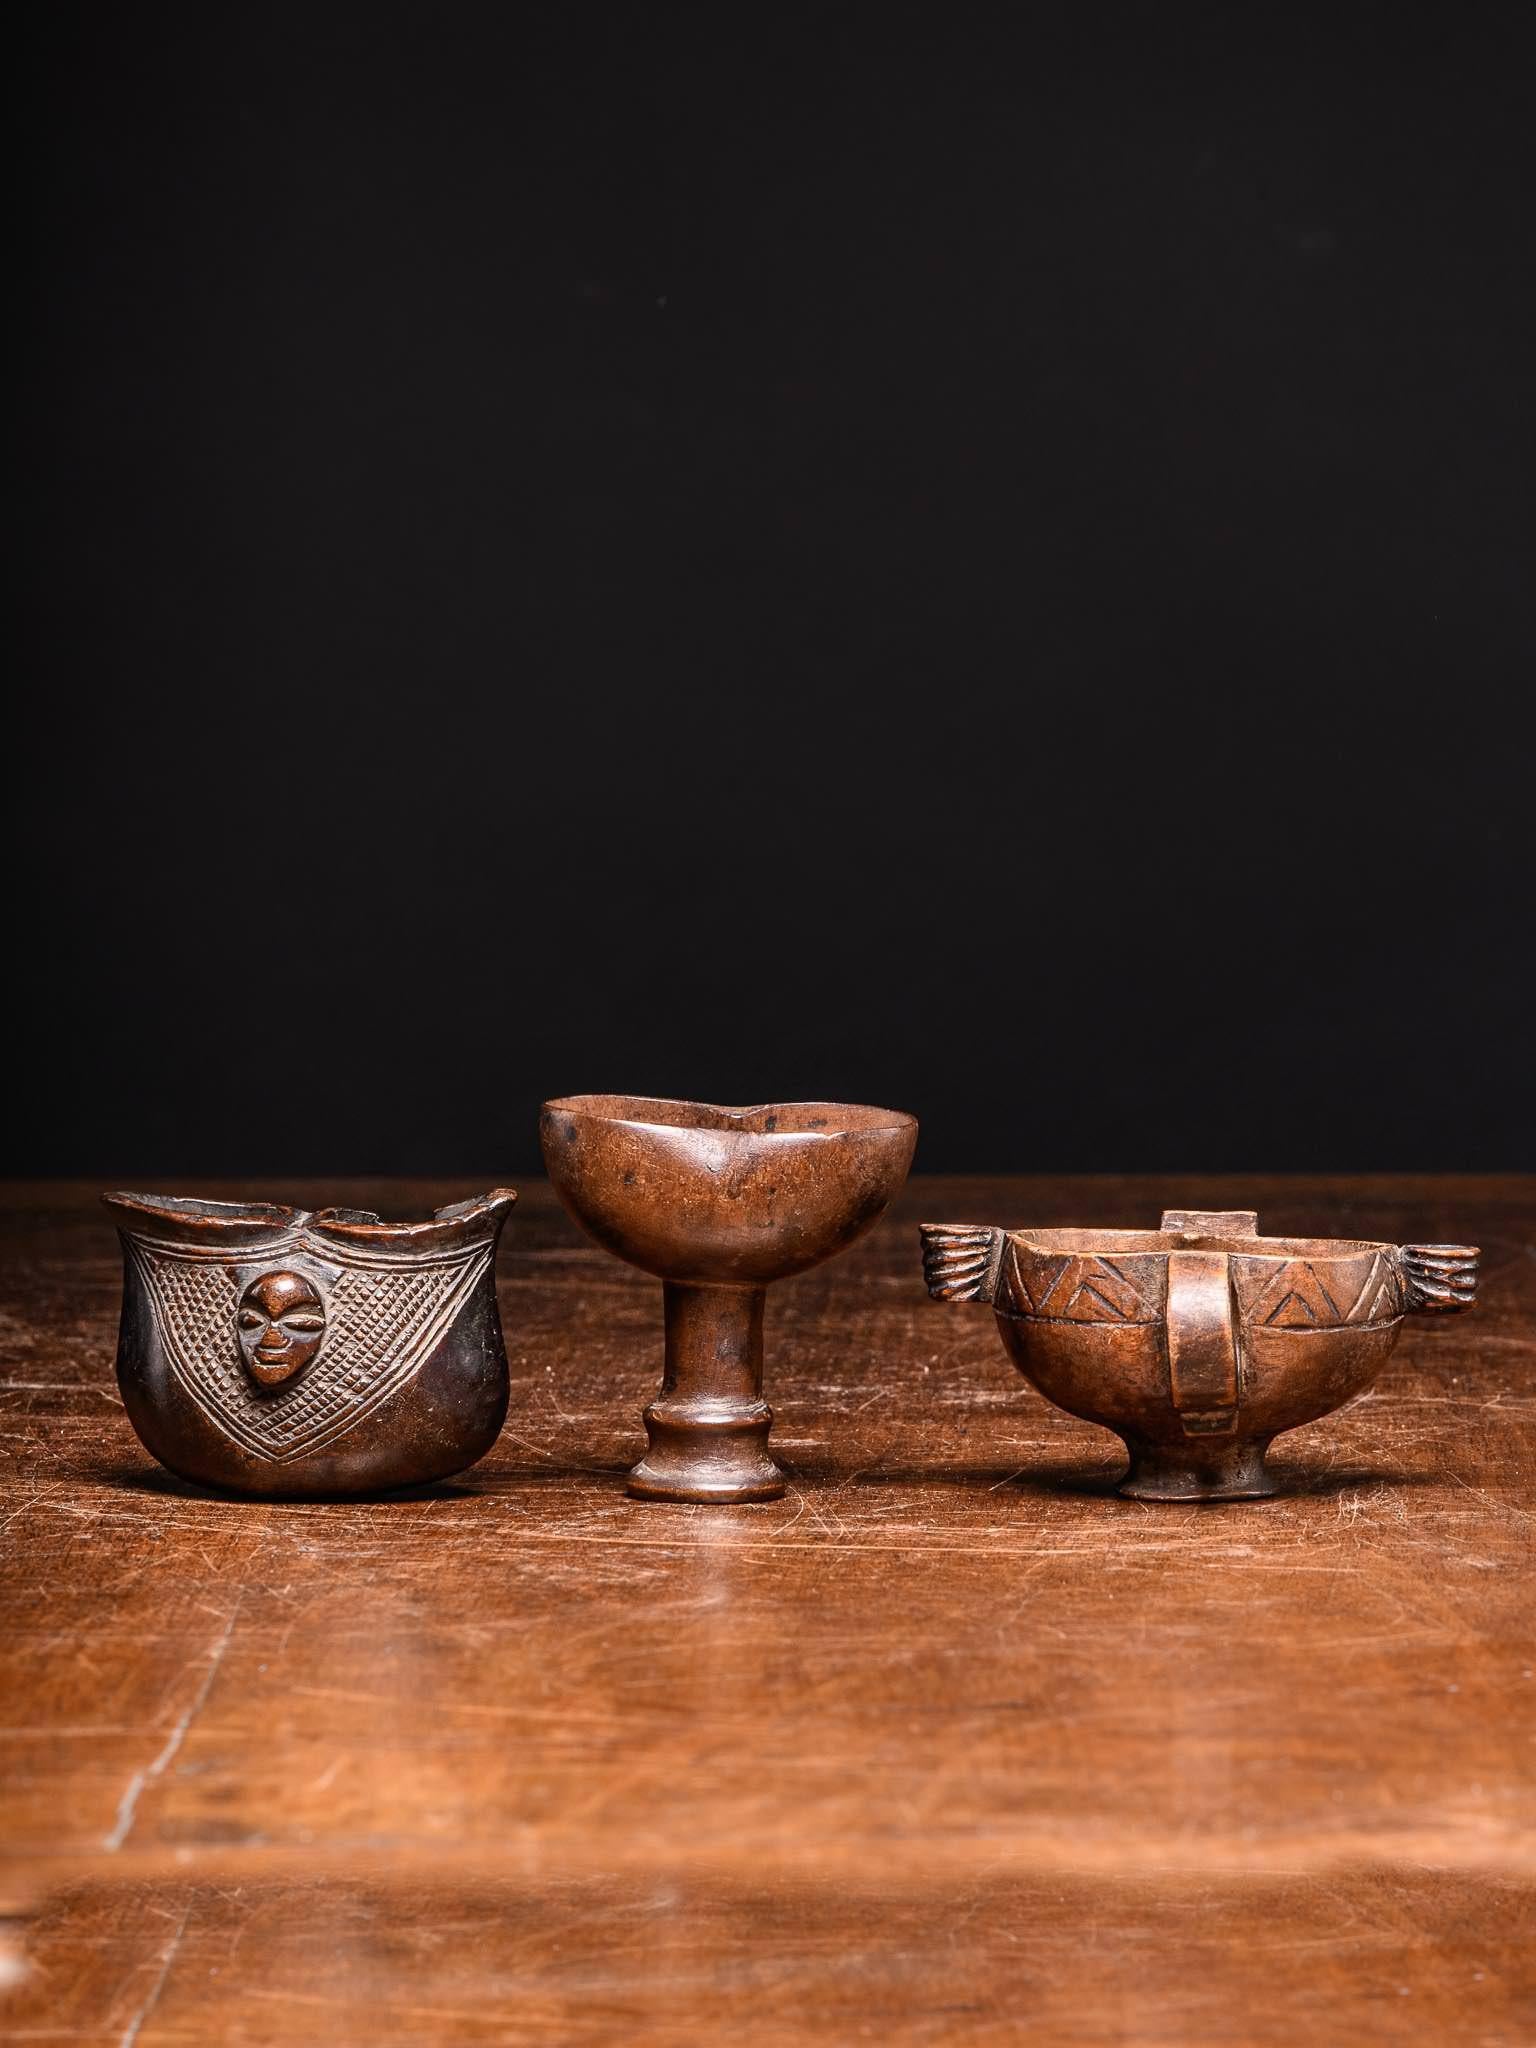 Yaka community leaders have a number of items that form part of their royal collection. One of these items is the kopa ceremonial cup (also called koopa or mbassa; used by the Suku too)carved from one piece of wood with two leaf shaped apertures,